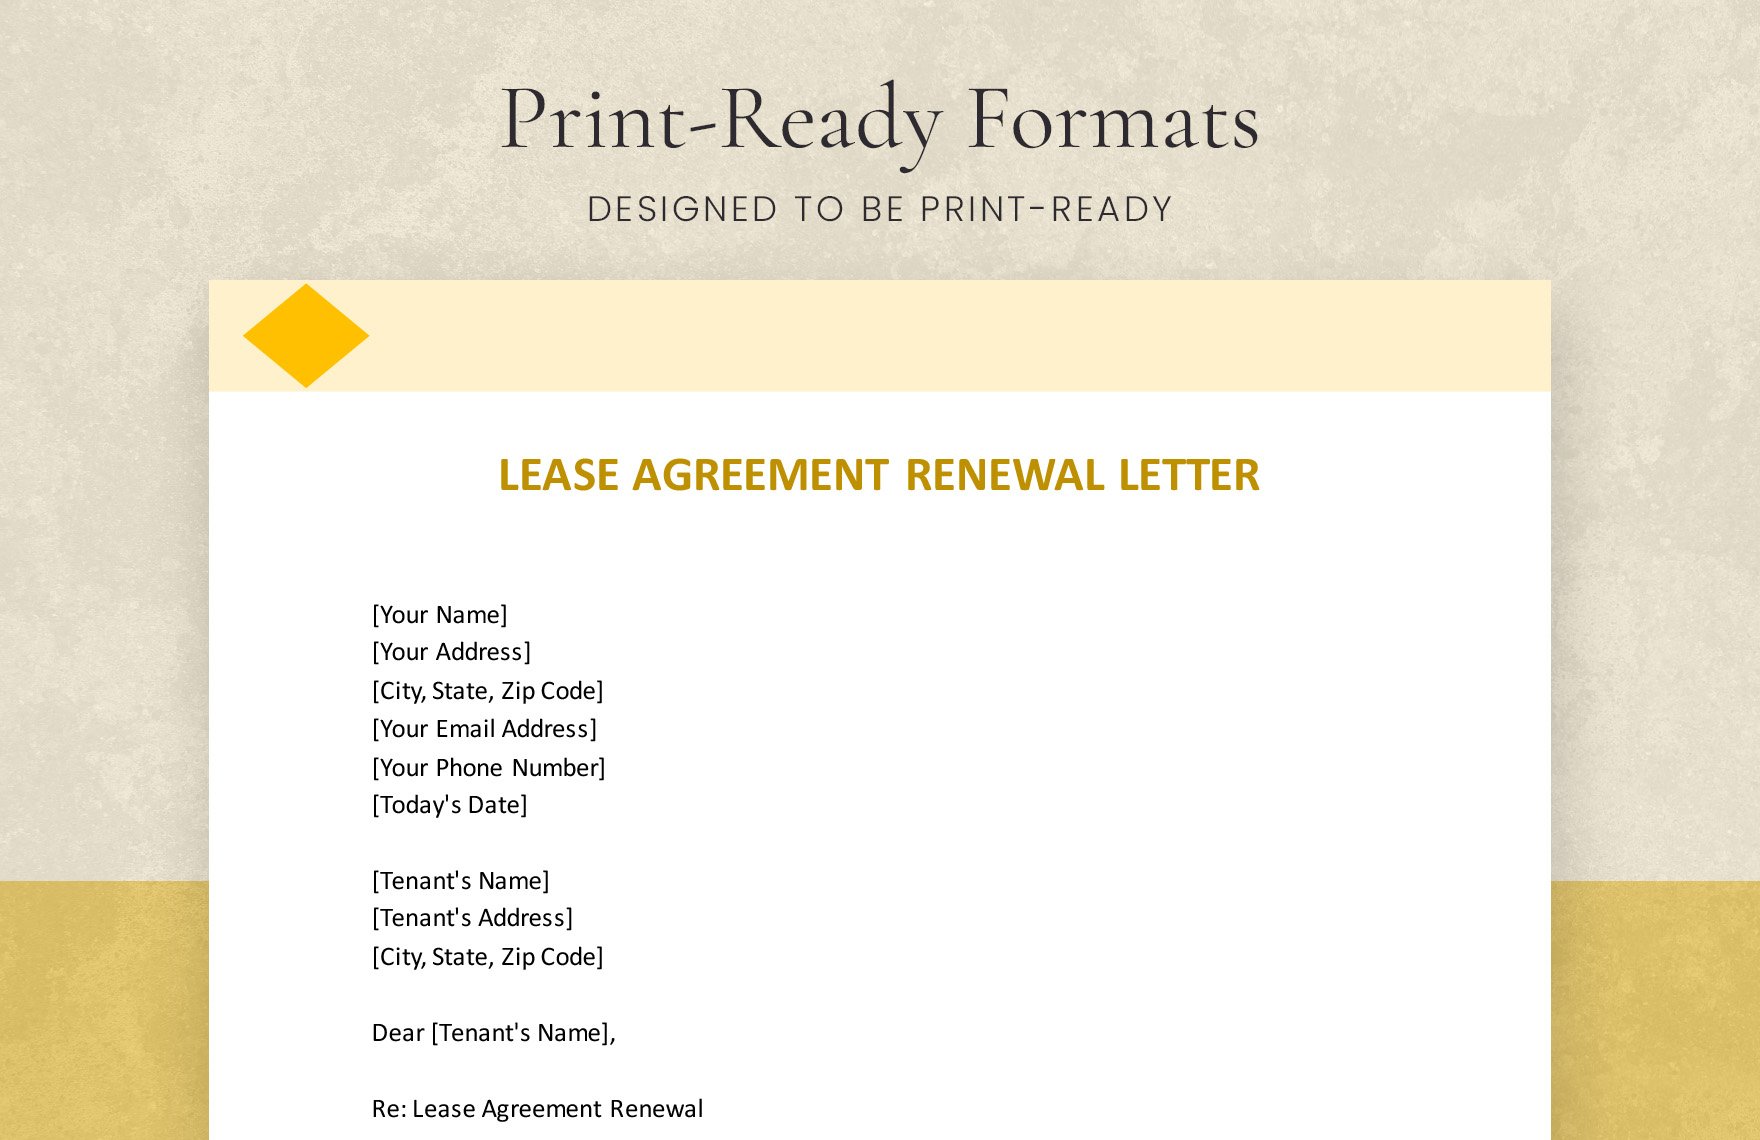 Lease Agreement Renewal Letter